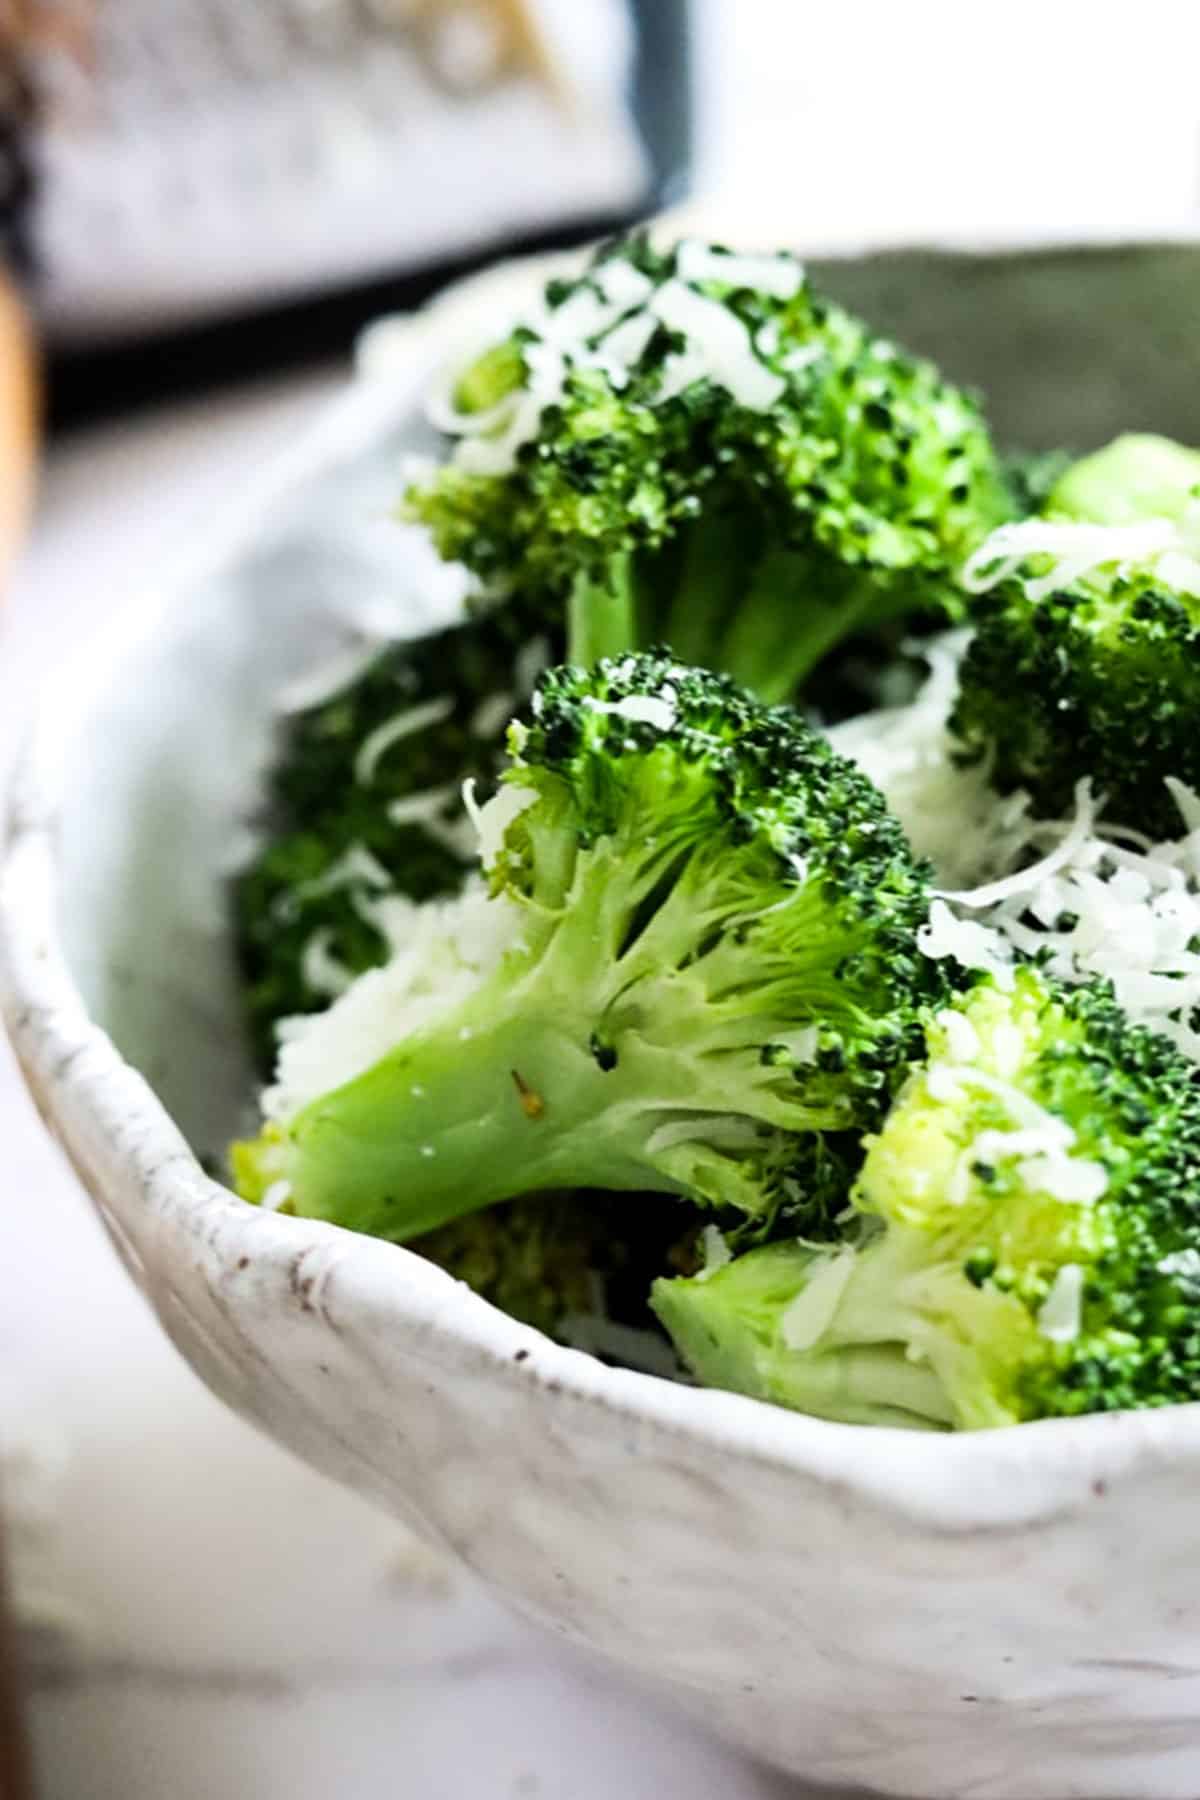 close up view of a broccoli floret in a bowl fresh from the air fryer